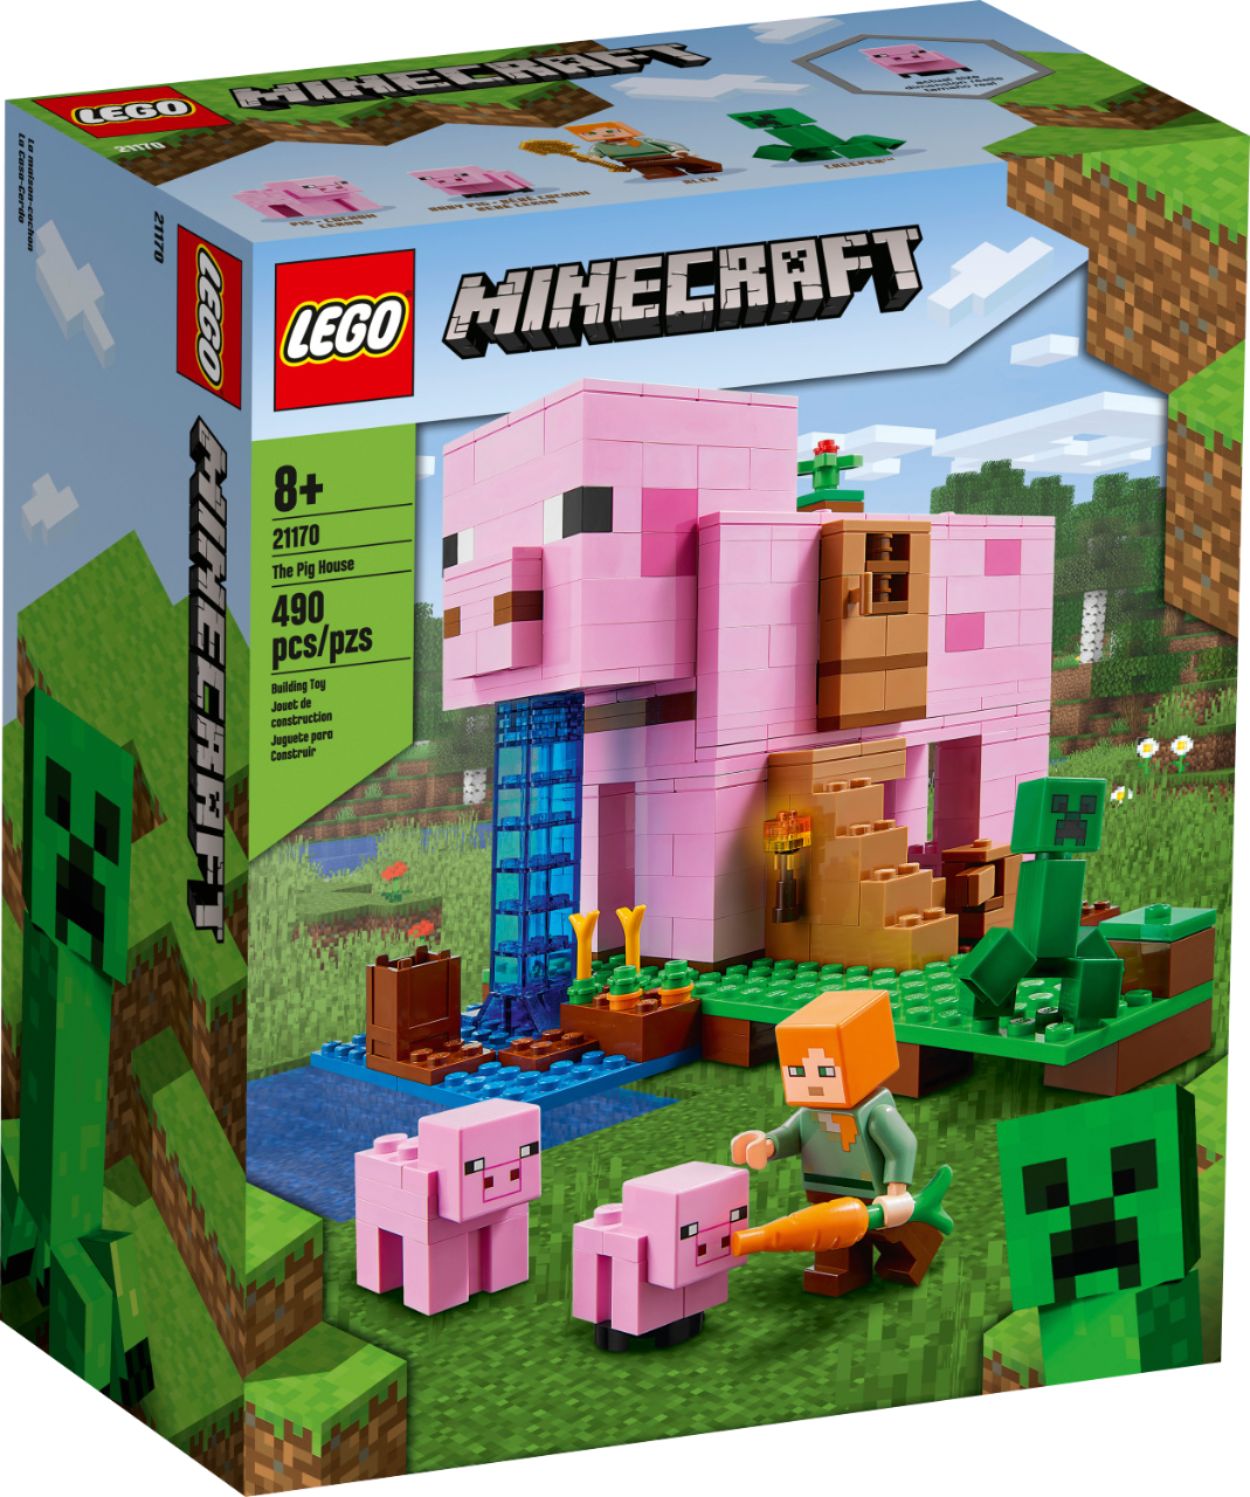 Left View: LEGO - Minecraft The Pig House 21170